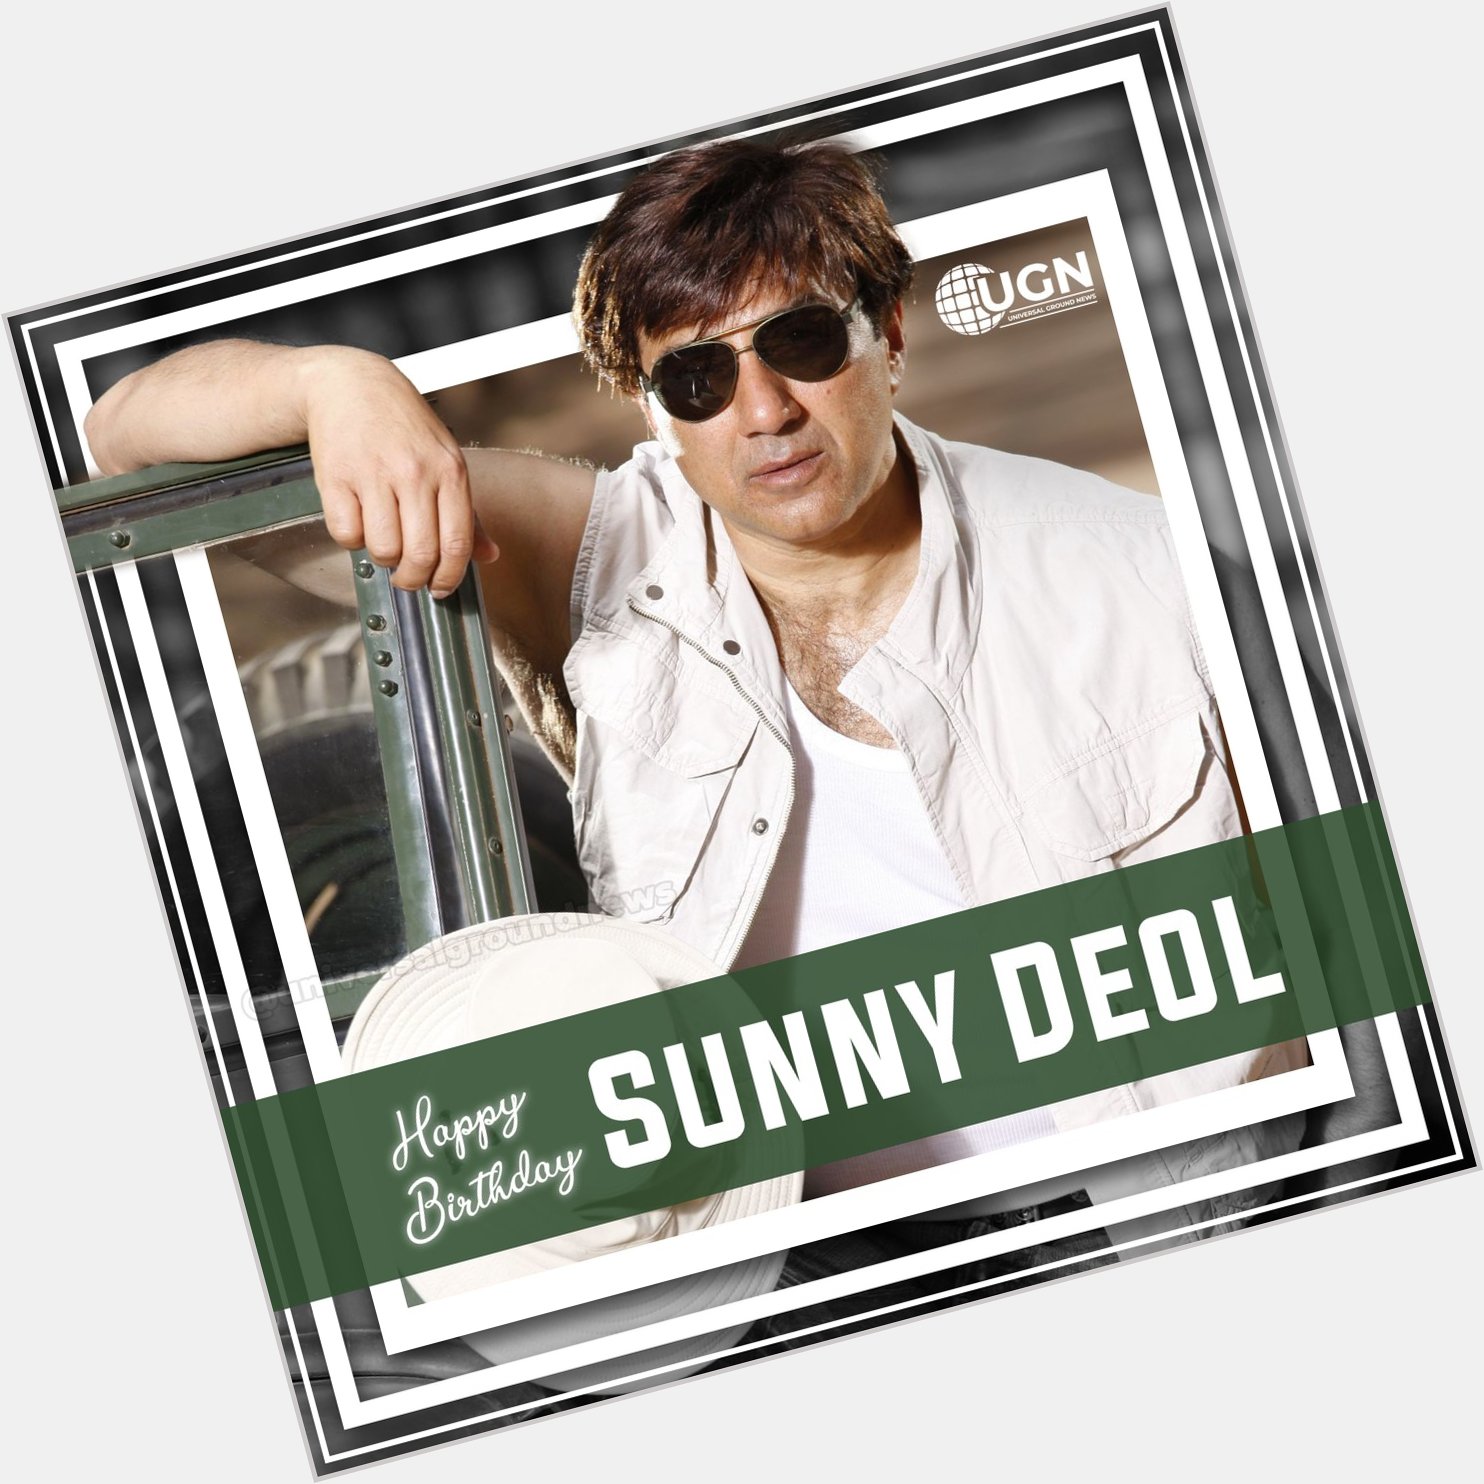 UGN wishes Happy Birthday to SUNNY DEOL.     